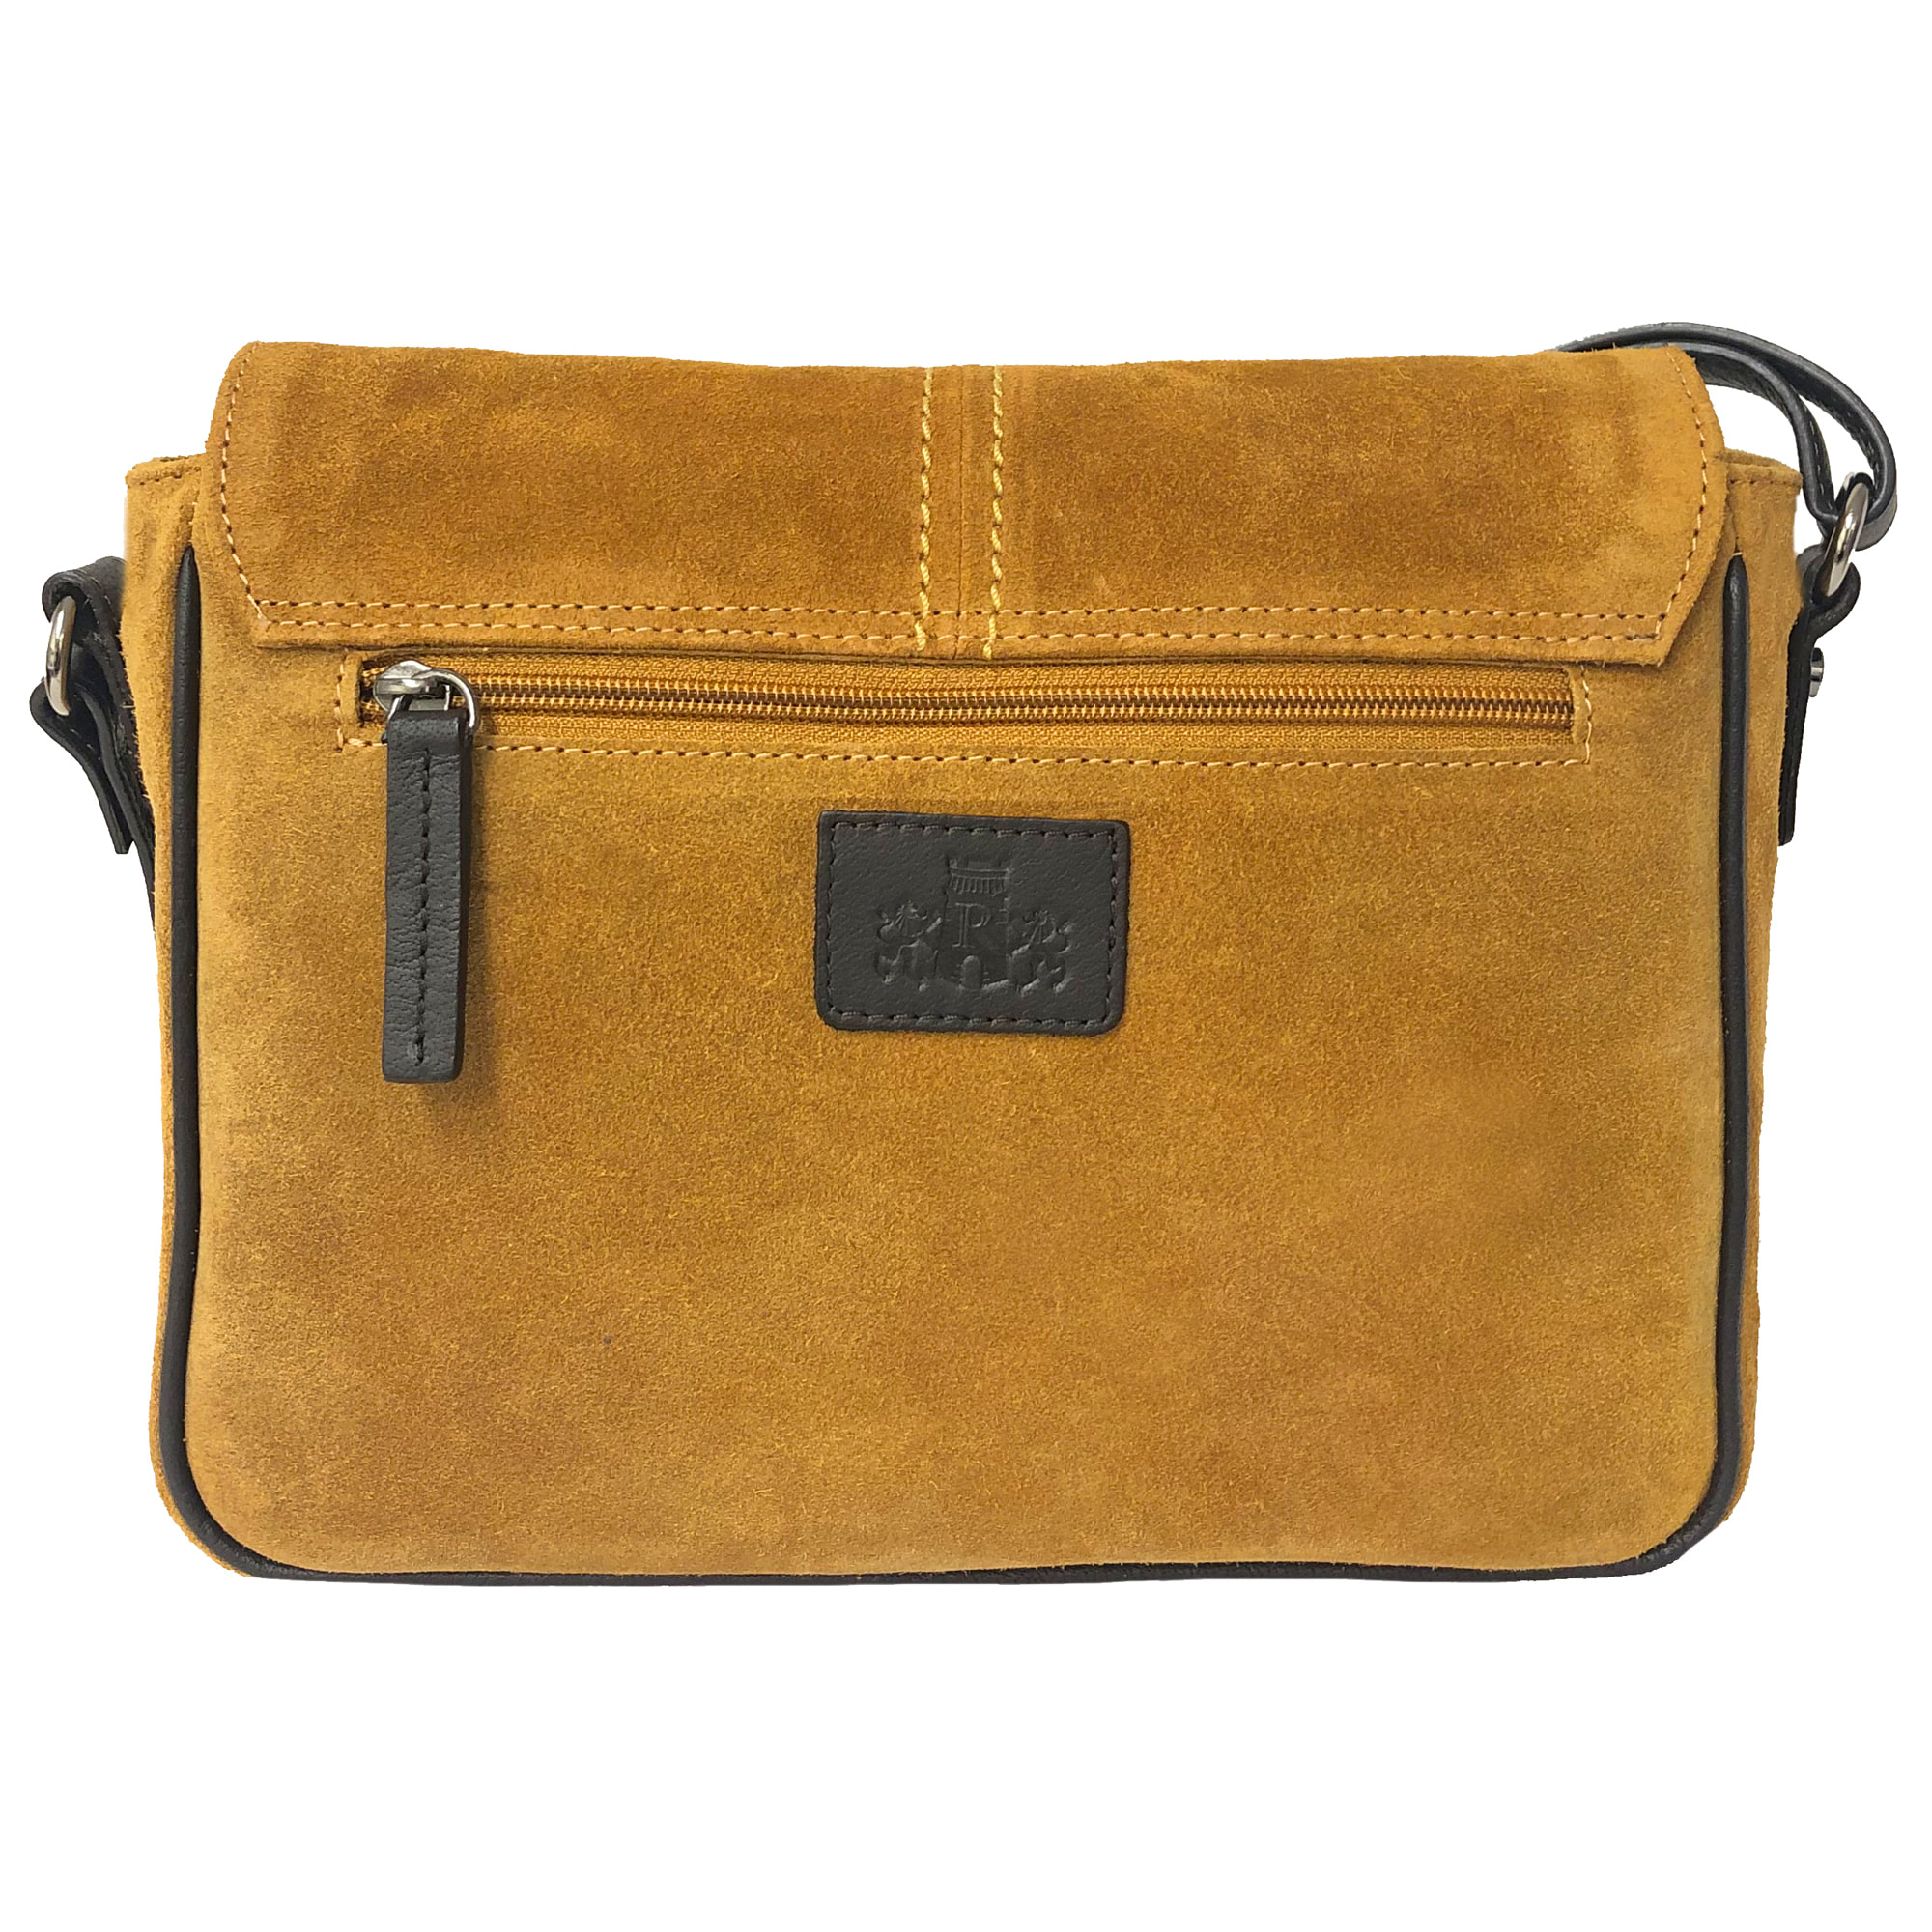 The Handbag Company specialises in premium leathergoods at discounted ...